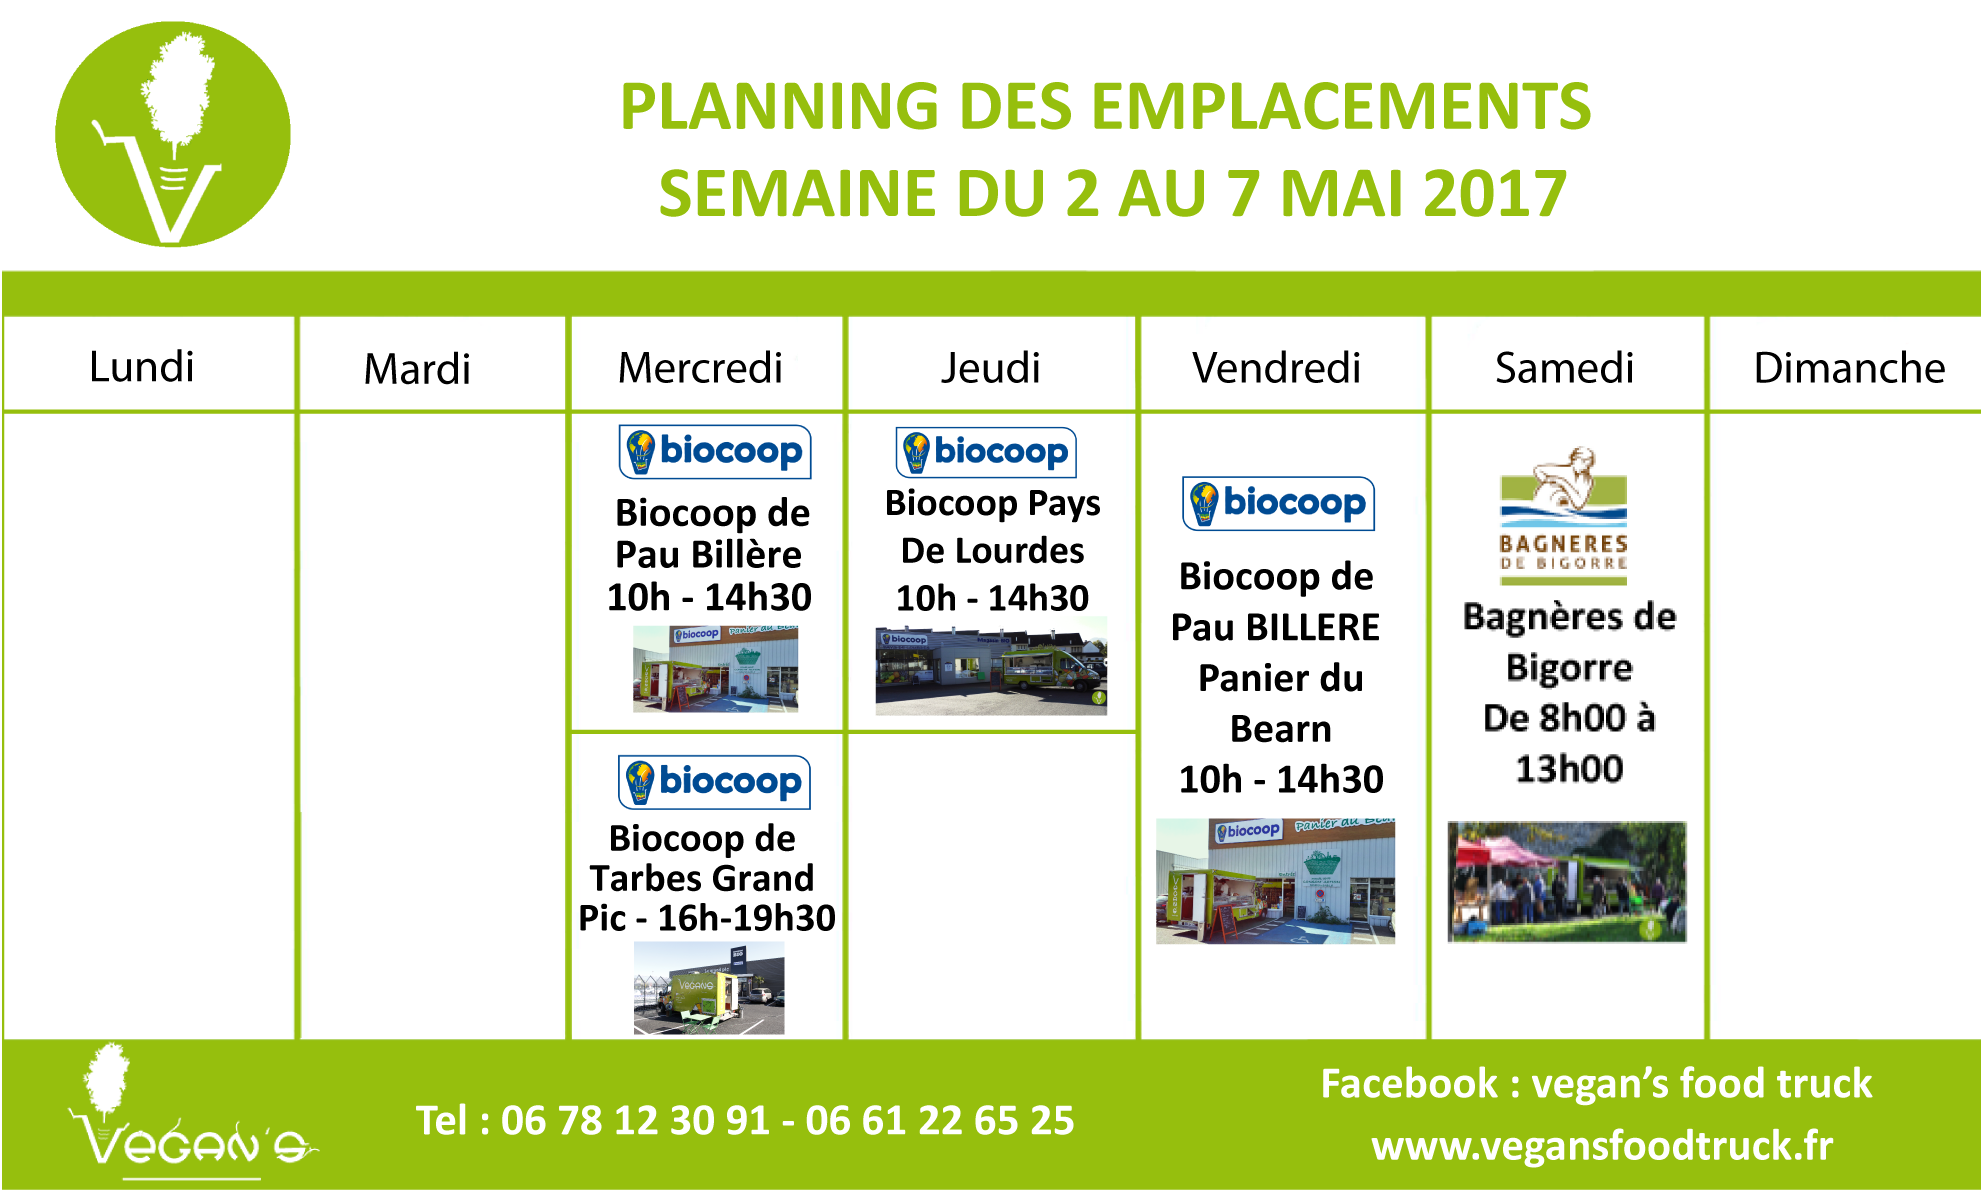 planning emplacements-2-7mai2017-01